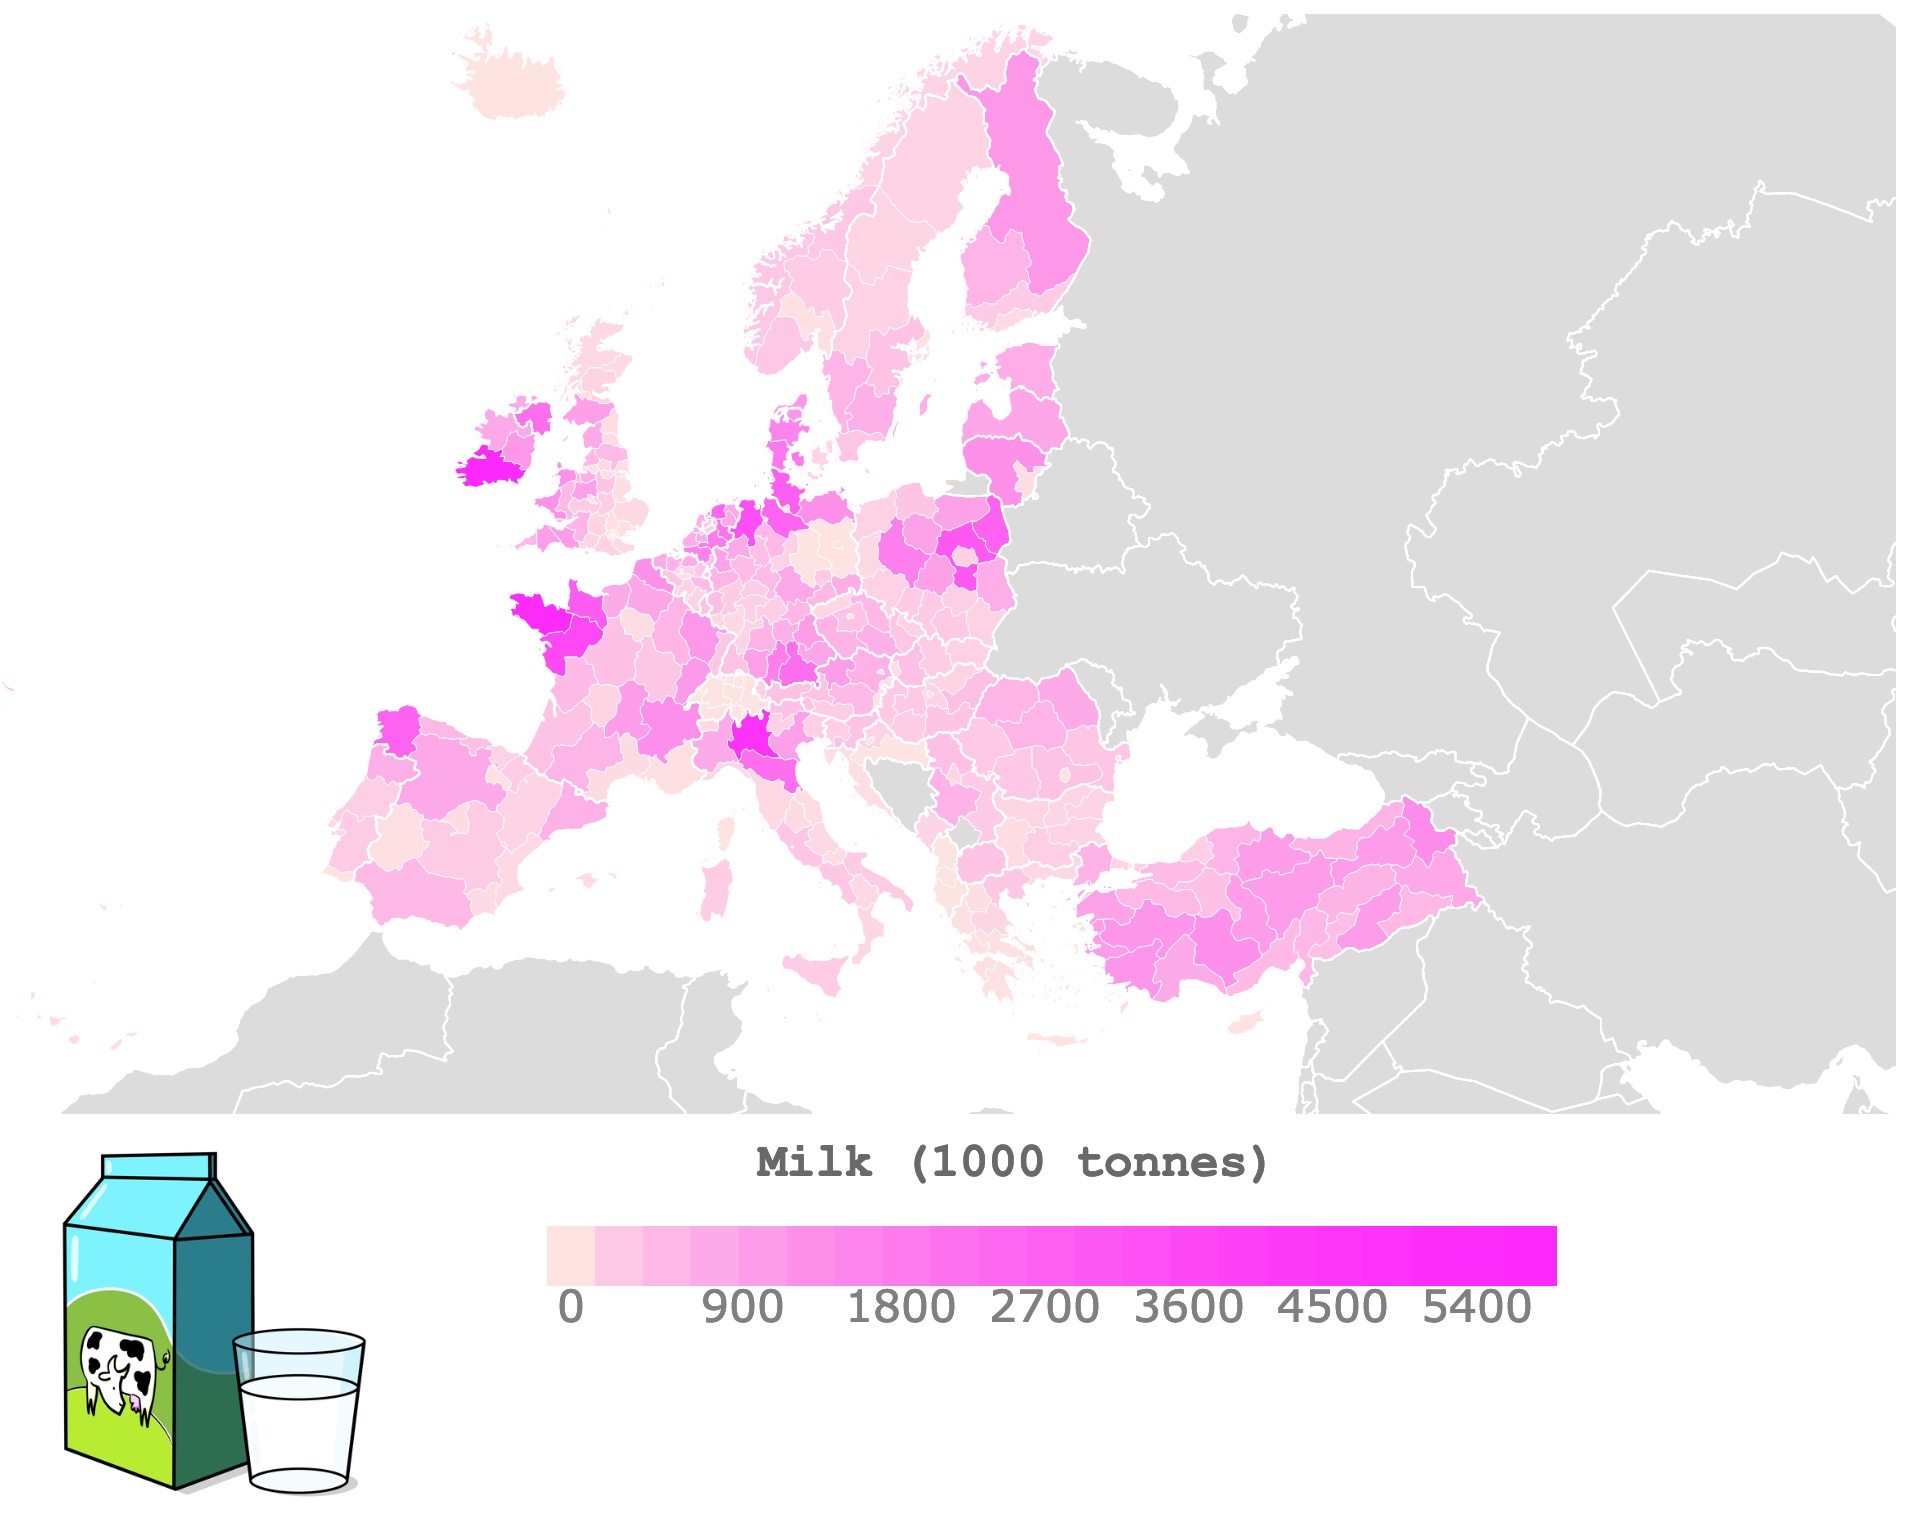 Map of Milk production in Europe